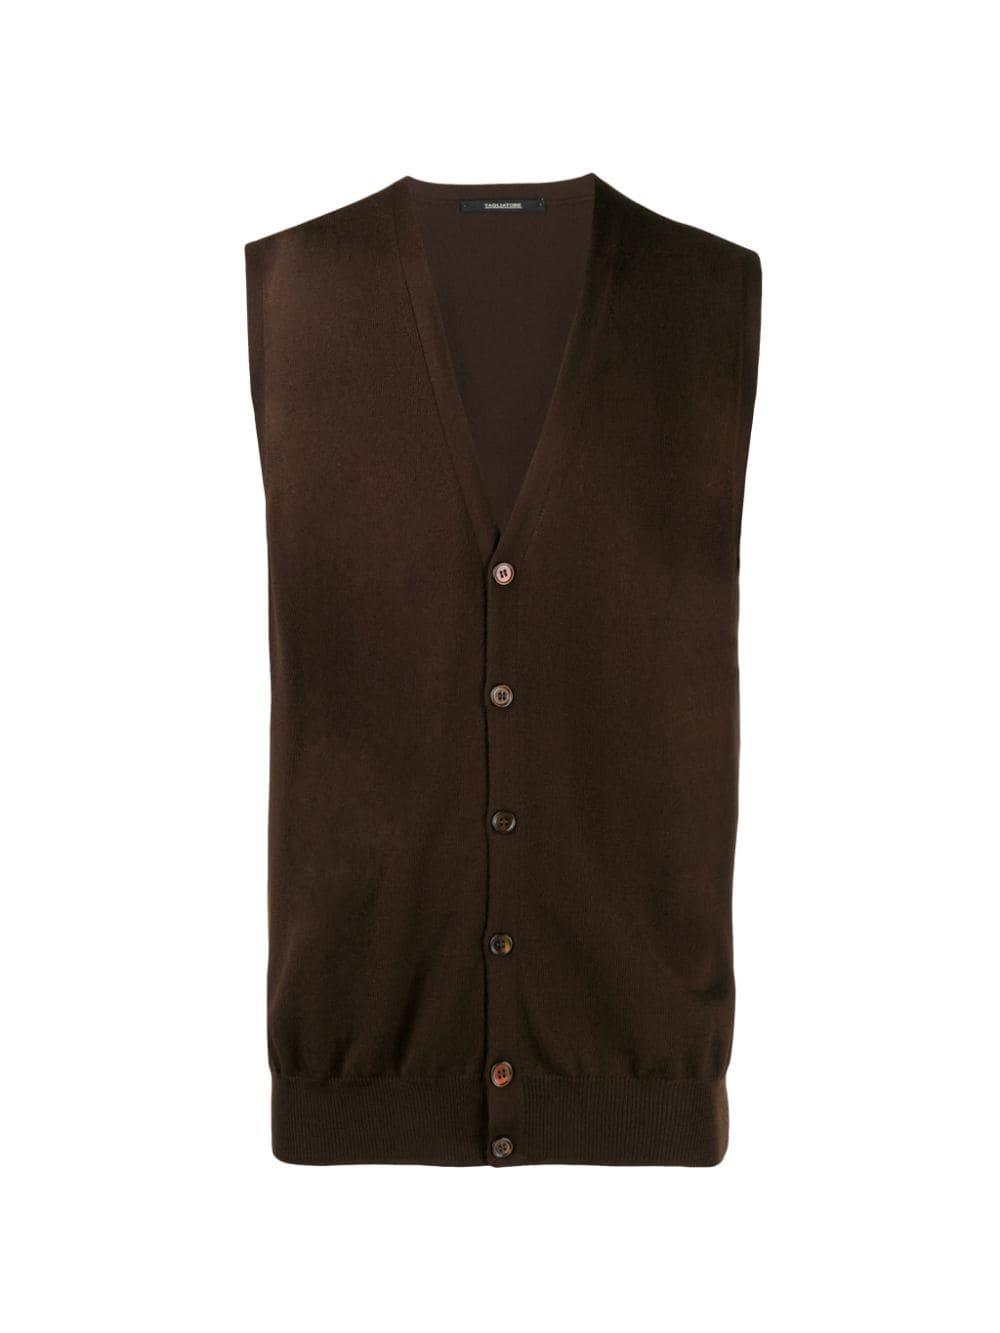 Tagliatore Wool Button Up Sleeveless Cardigan in Brown for Men - Lyst